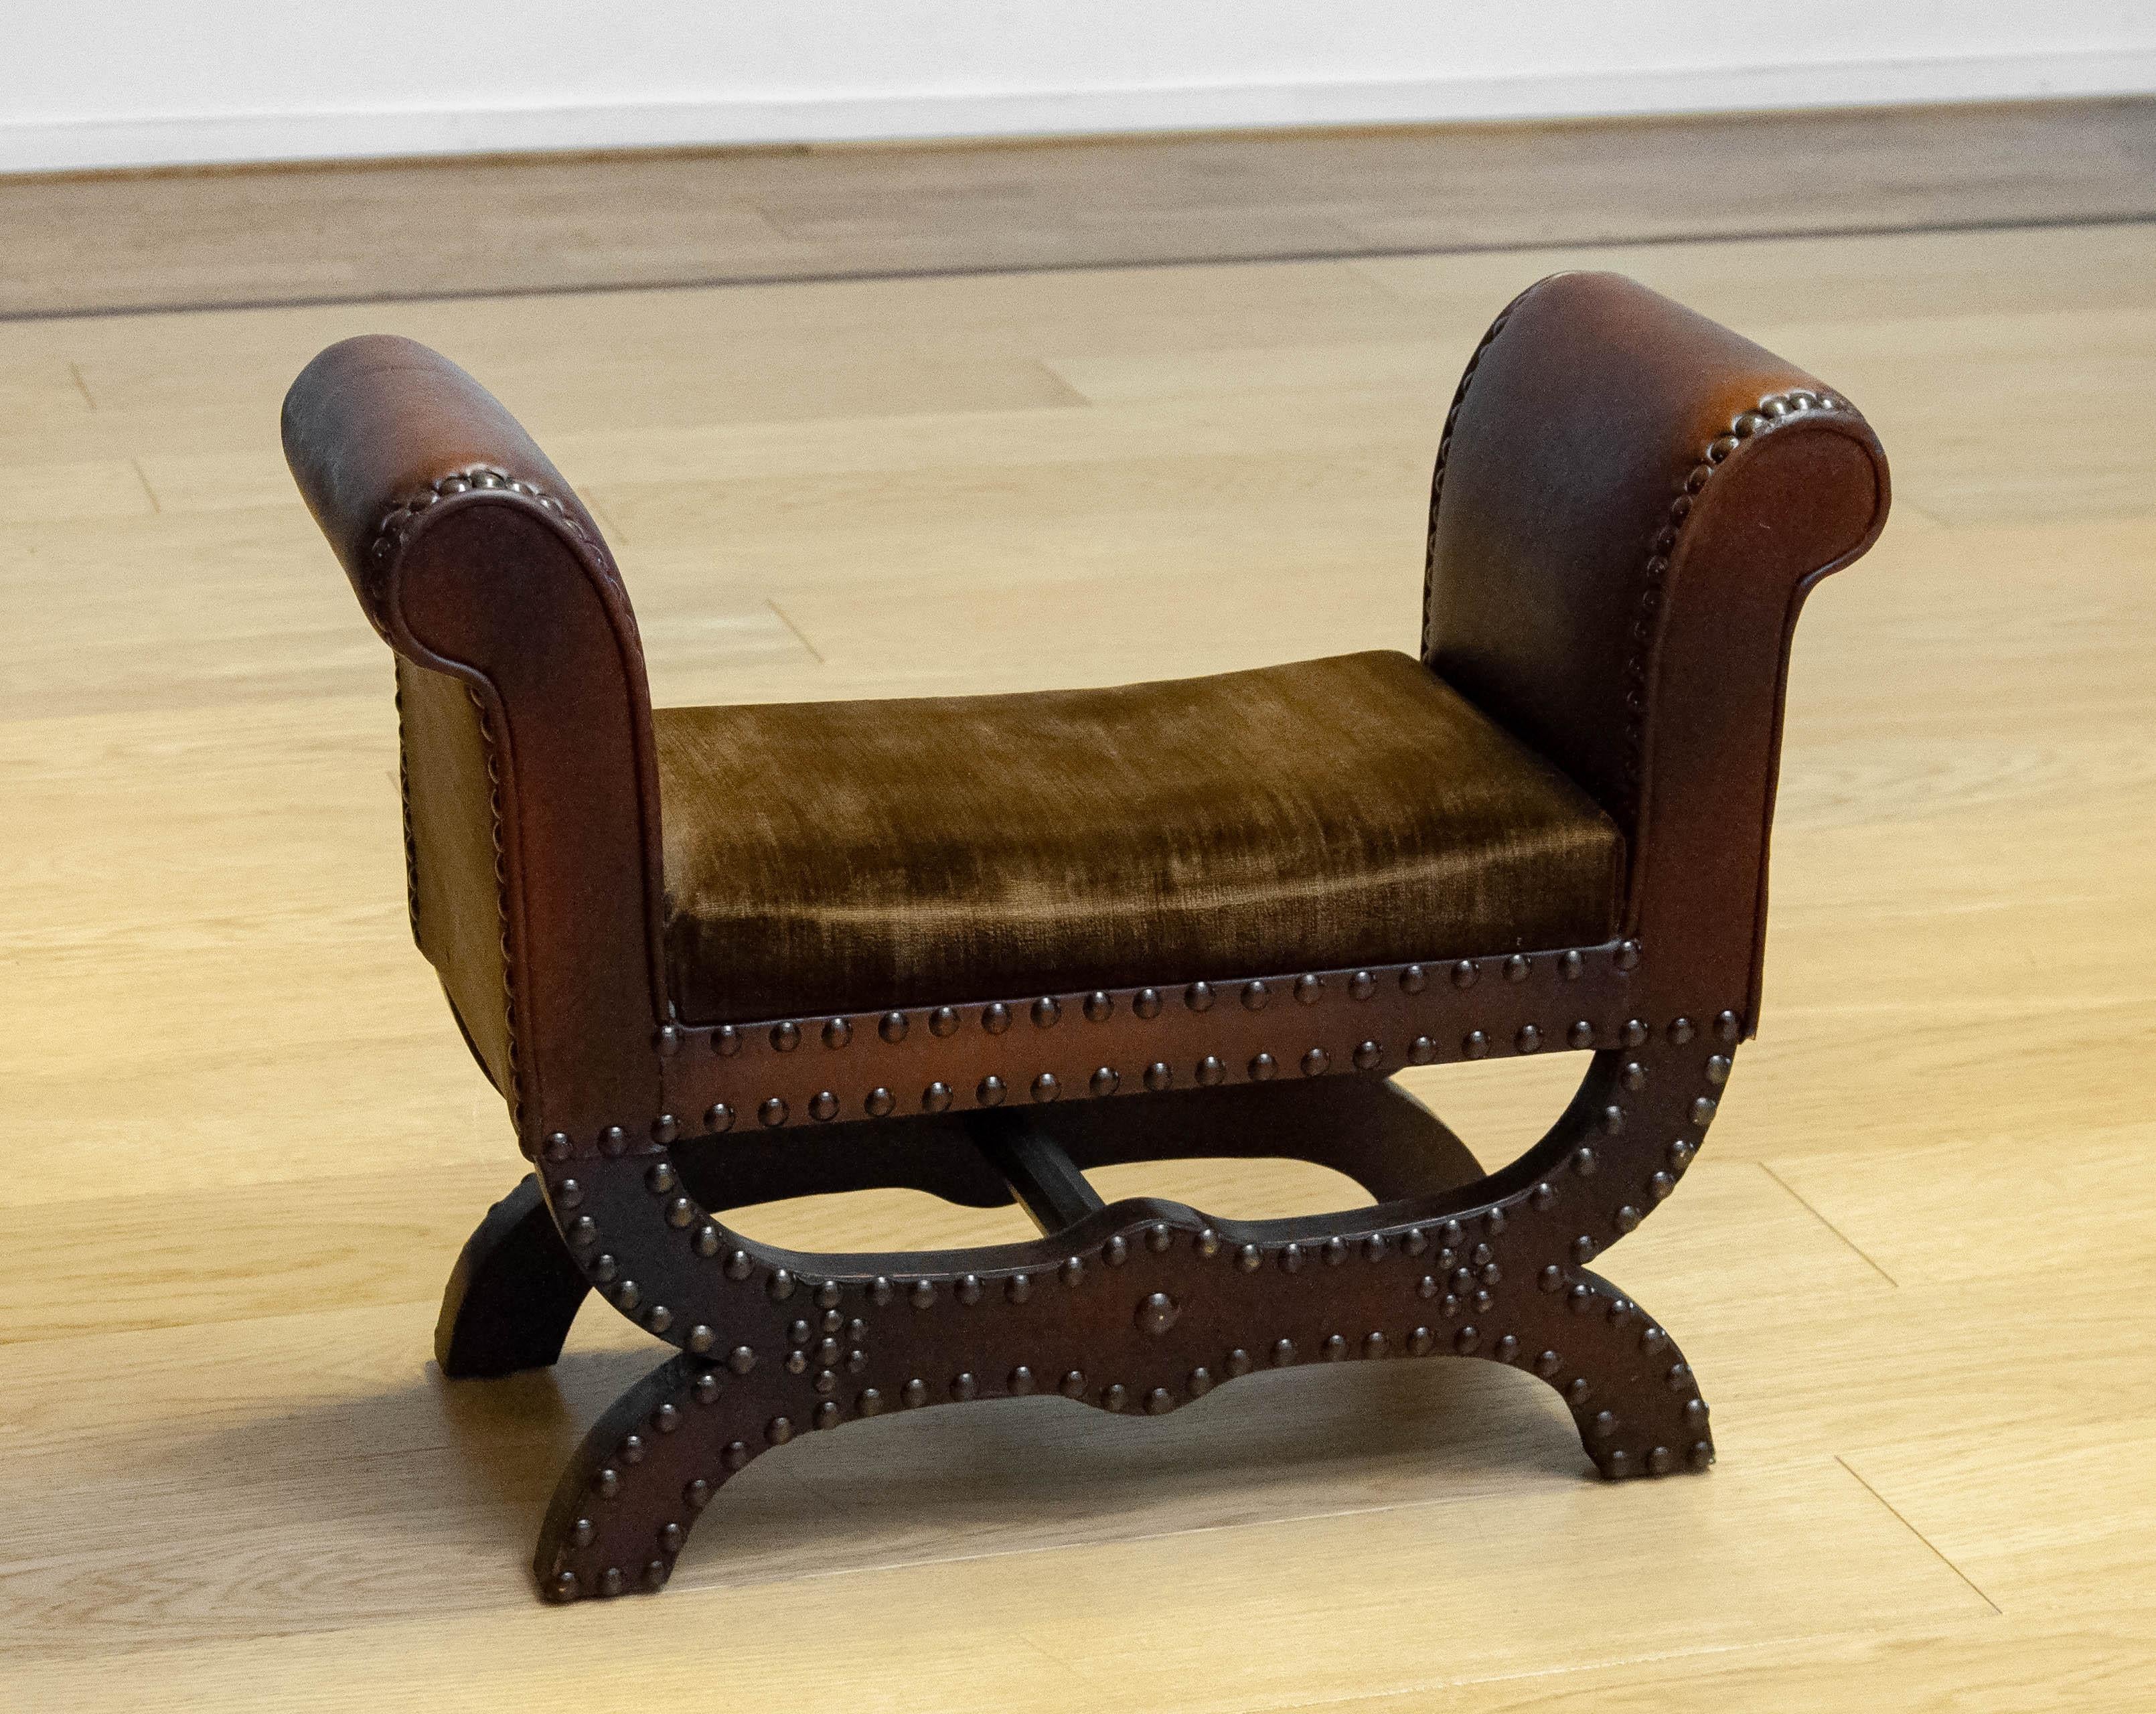 Karl Johan 1930s Foot Stool With Patinated Brown Leather By Otto Schulz For Boet Göteborg  For Sale